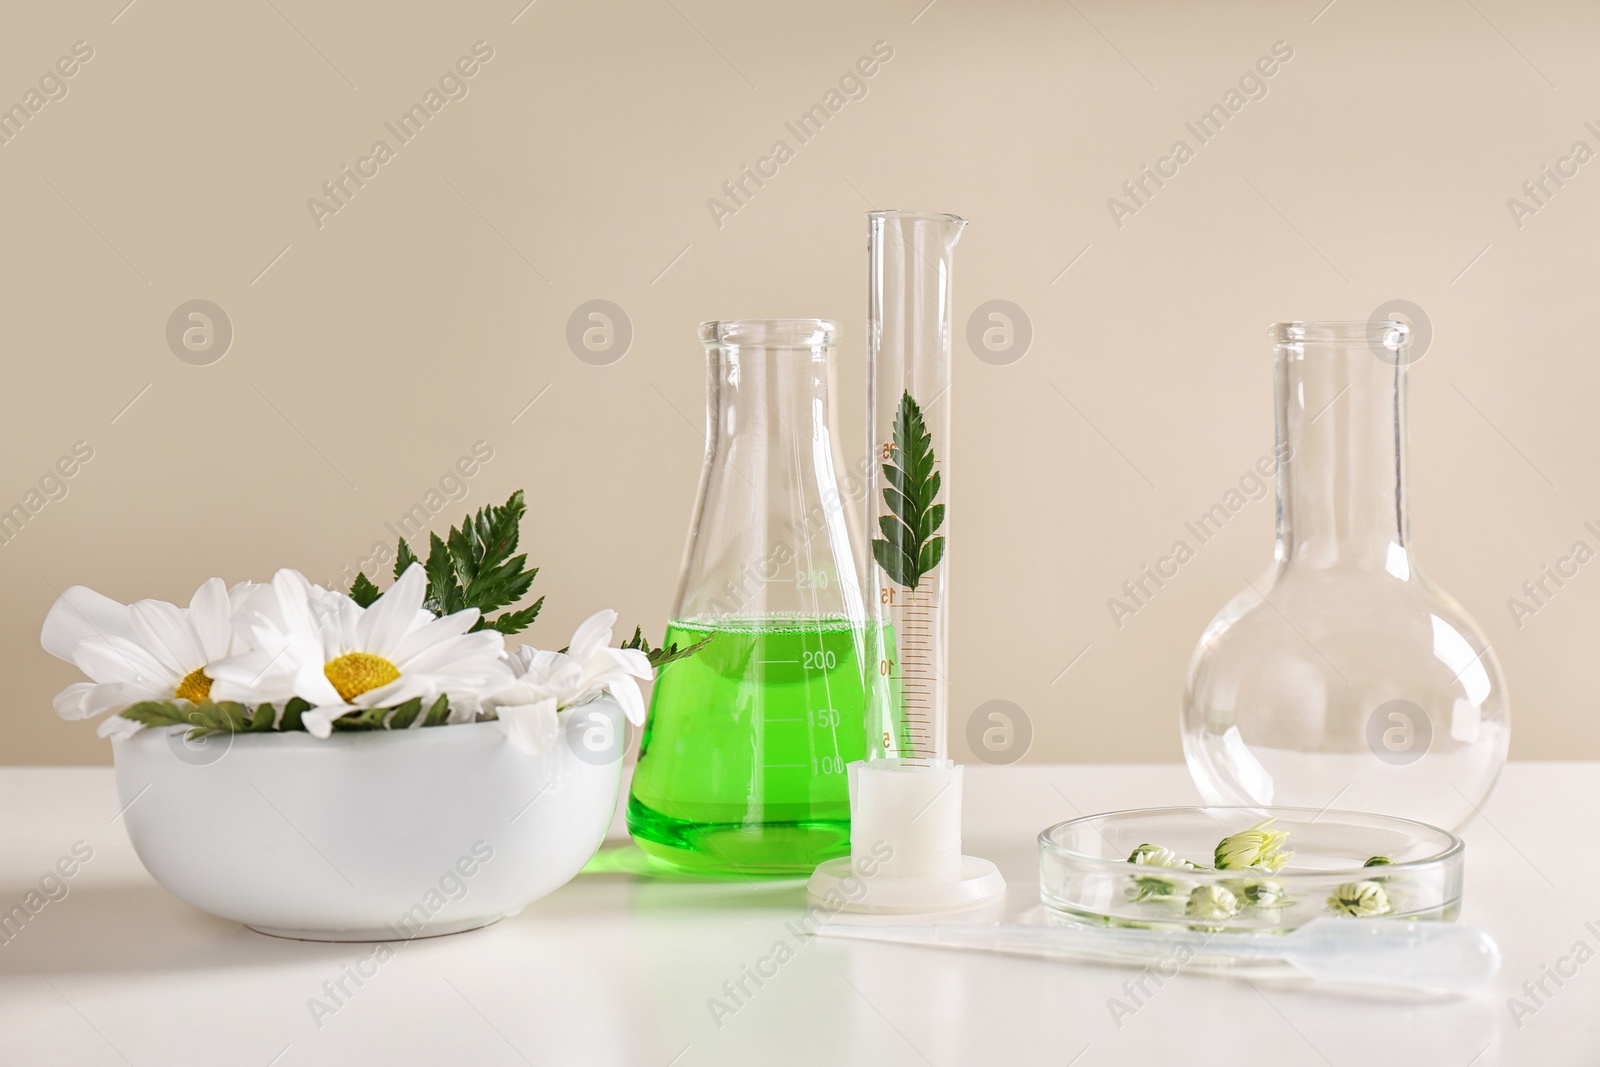 Photo of Ingredients and laboratory glassware on table. Dermatology research